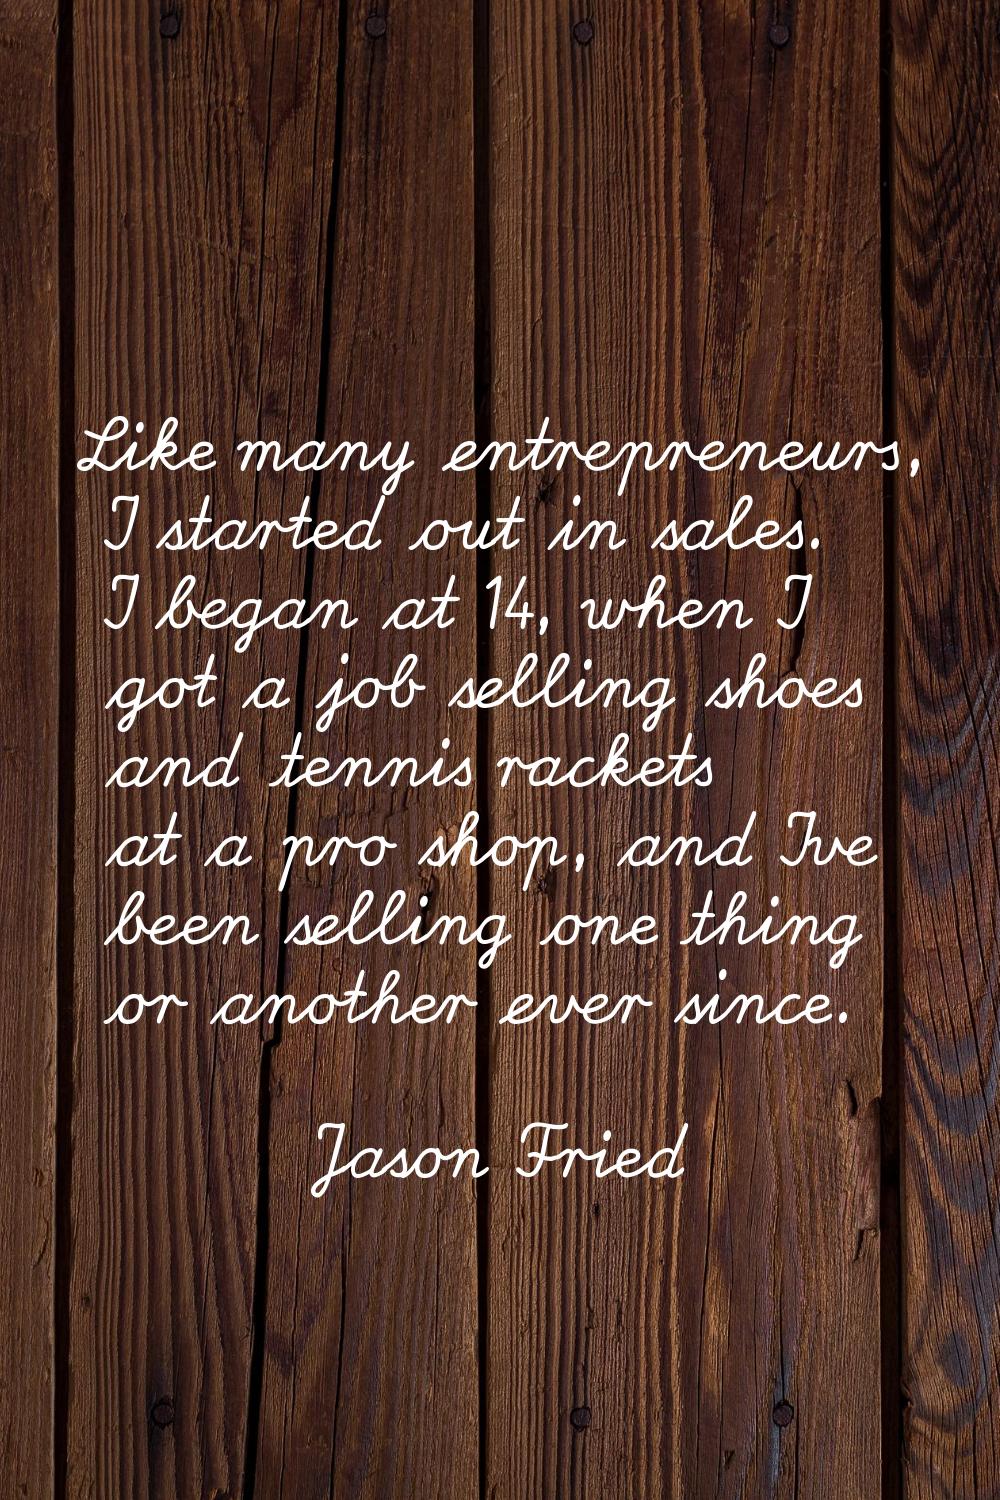 Like many entrepreneurs, I started out in sales. I began at 14, when I got a job selling shoes and 